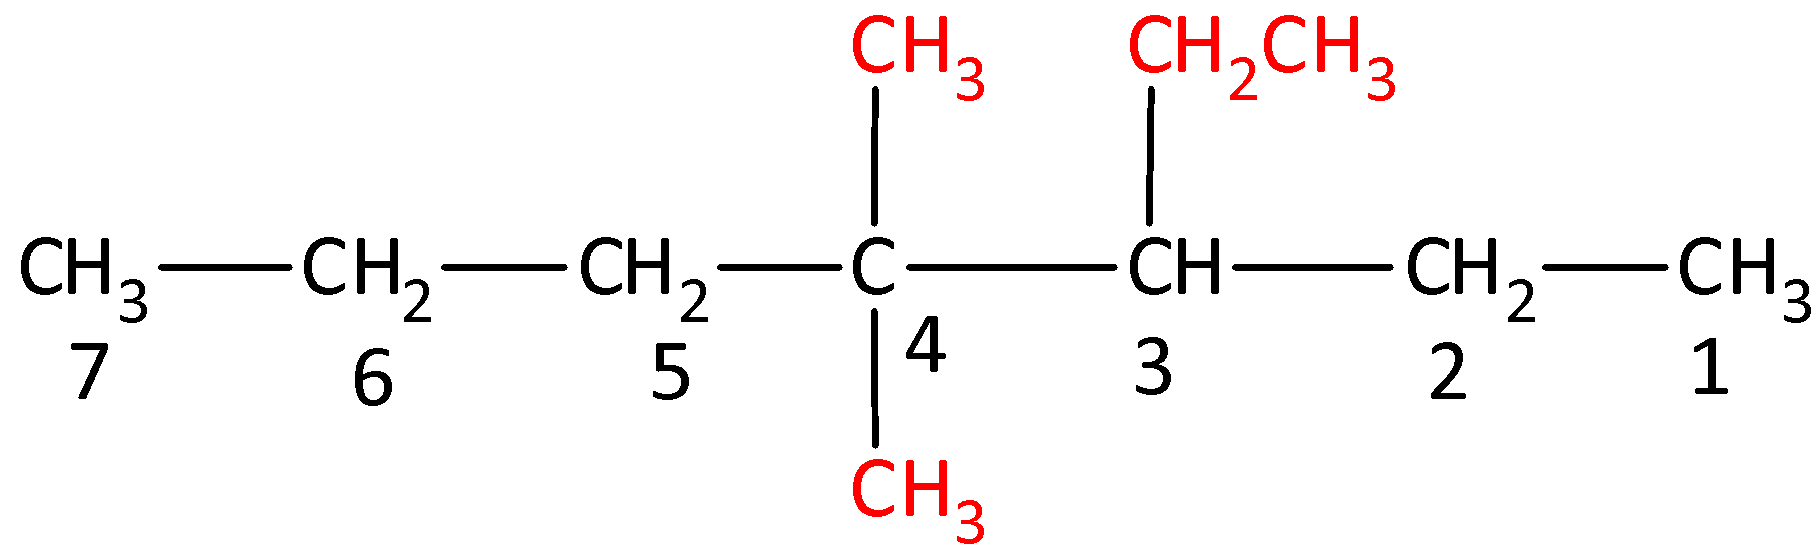 Branched Hydrocarbons